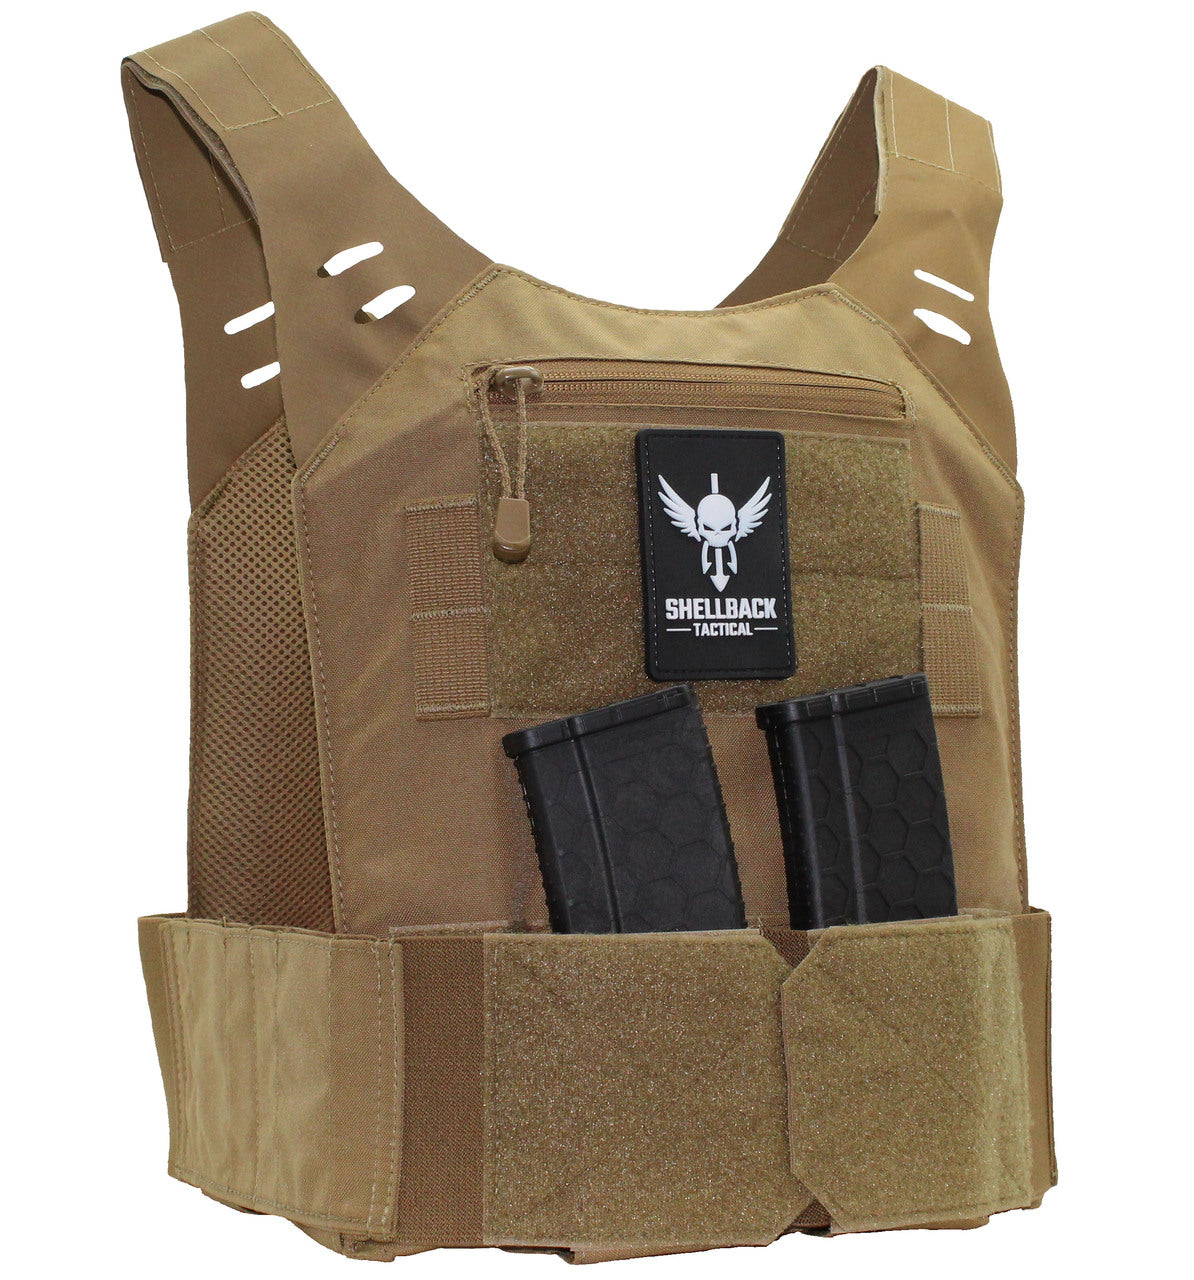 A Shellback Tactical Stealth Low Vis Plate Carrier with two magazines.